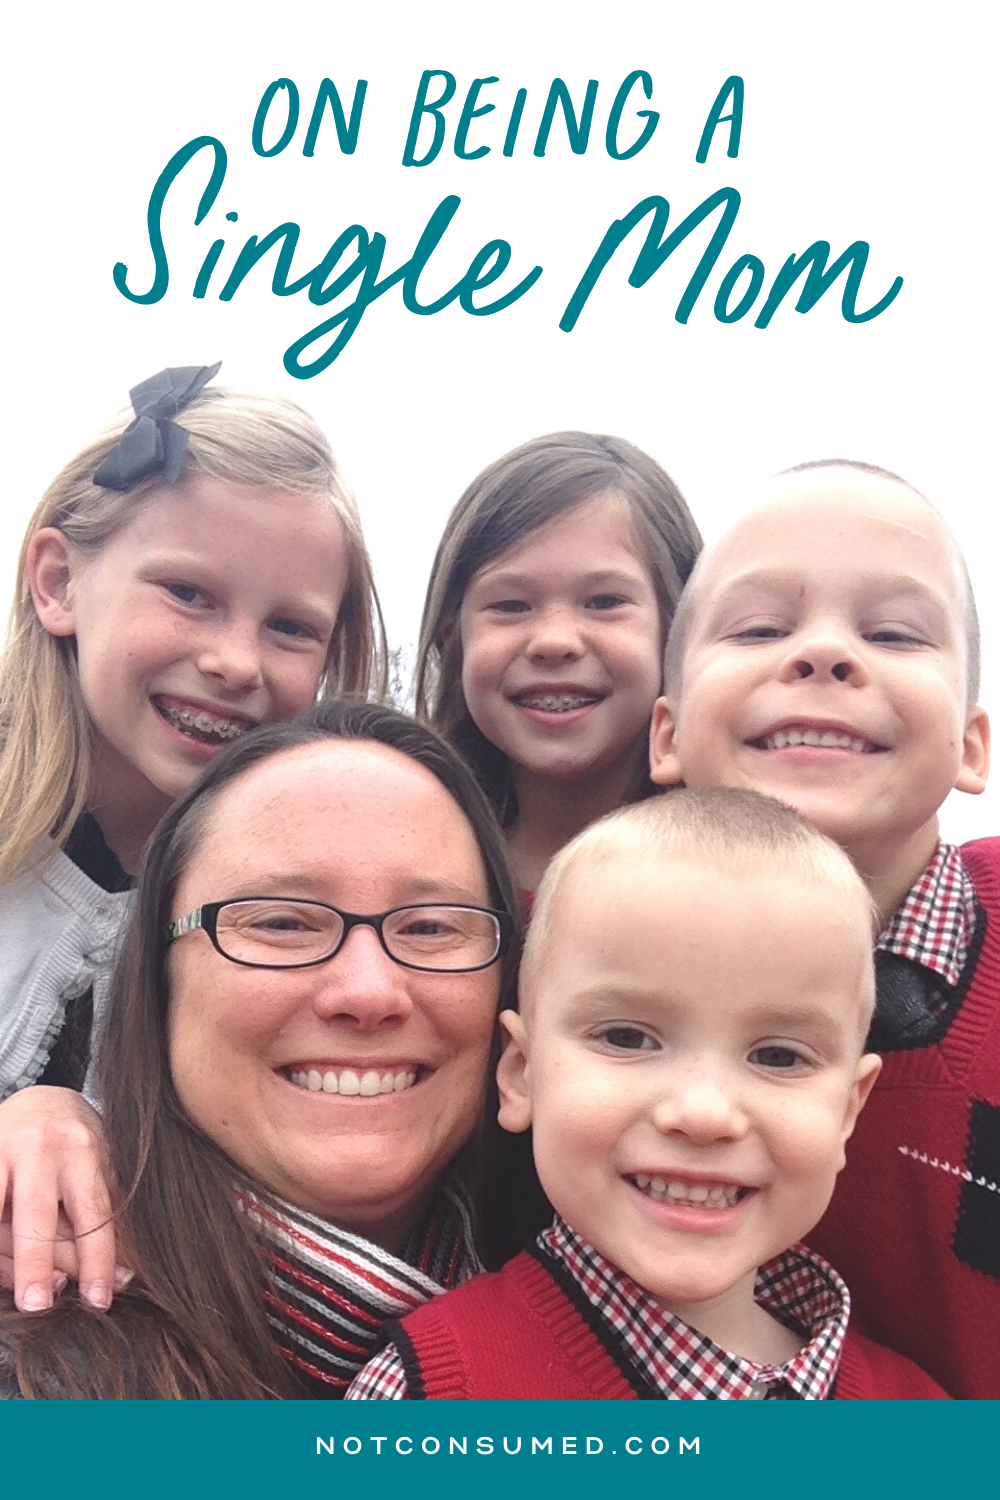 Being a single mom